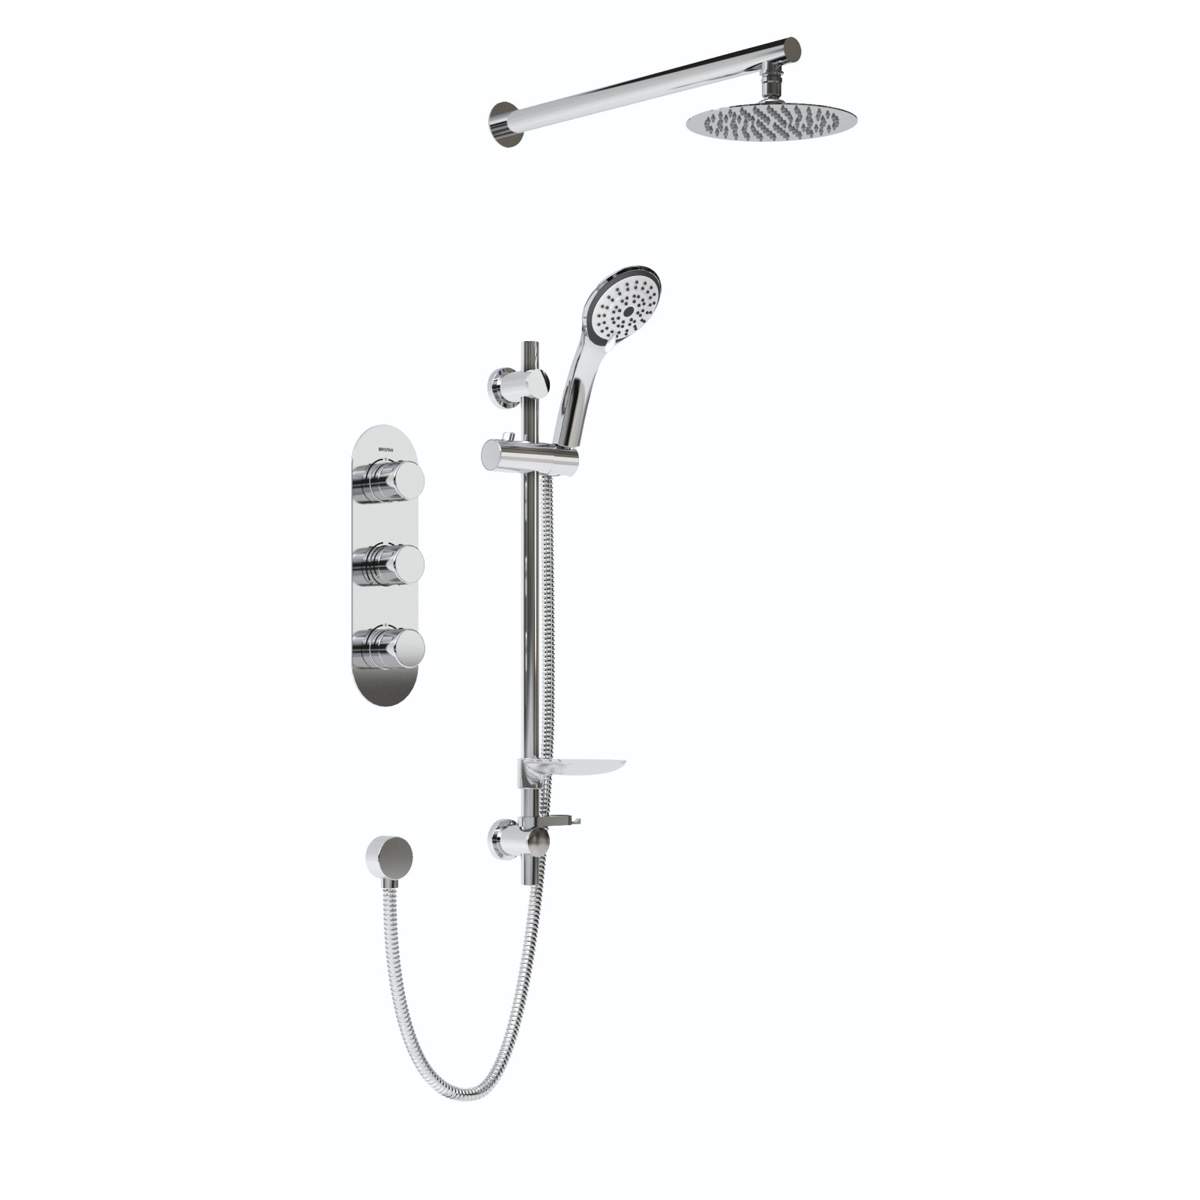 Bristan Pivot Shower Pack with Fixed Head and Kit (PIVOT SHWR PK)